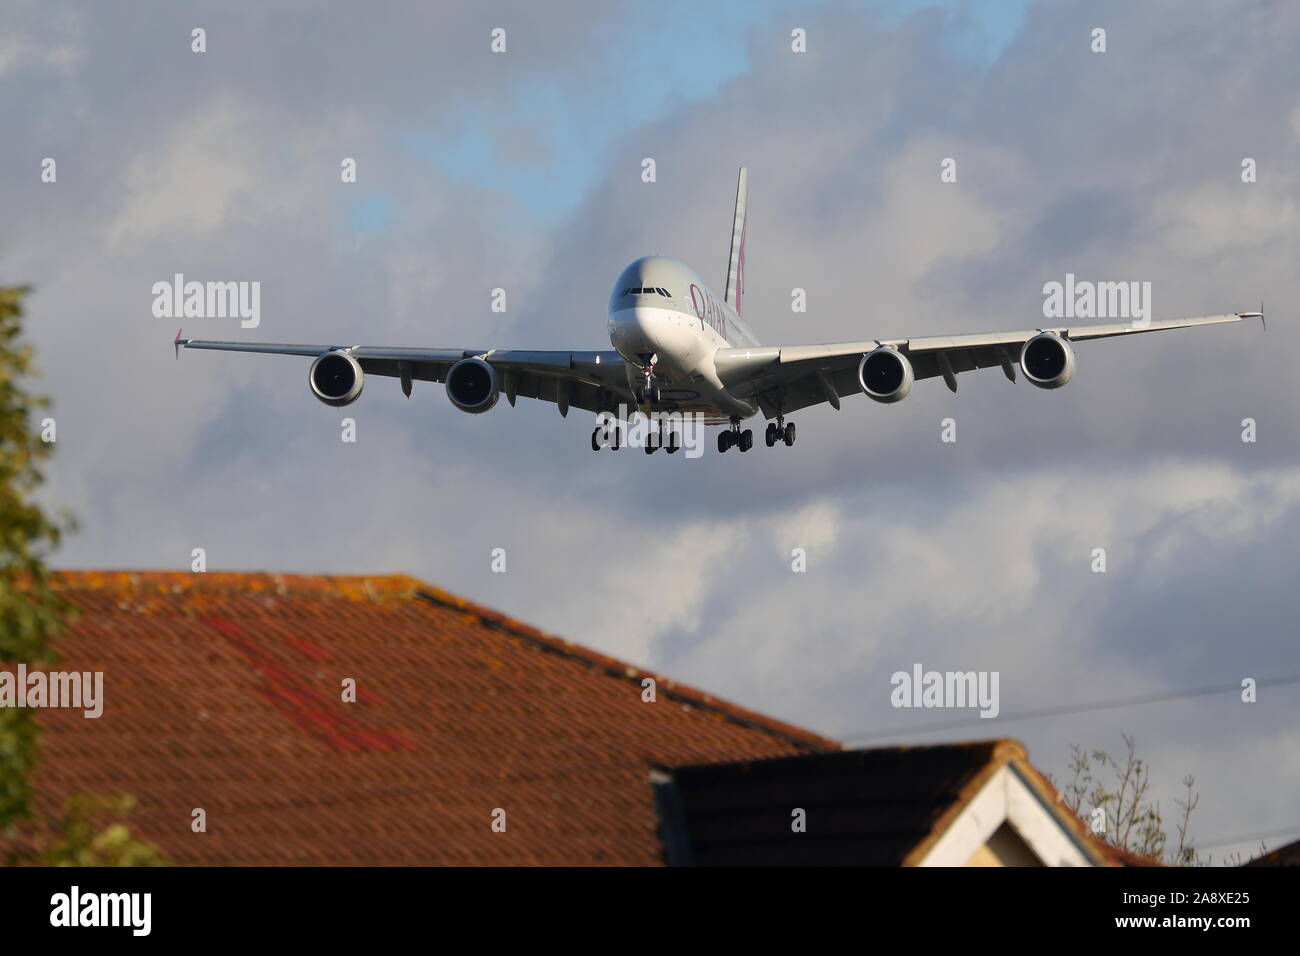 Qatar Airways Airbus A380 A7-APD flying low over the rooftops at London Heathrow Airport, UK Stock Photo